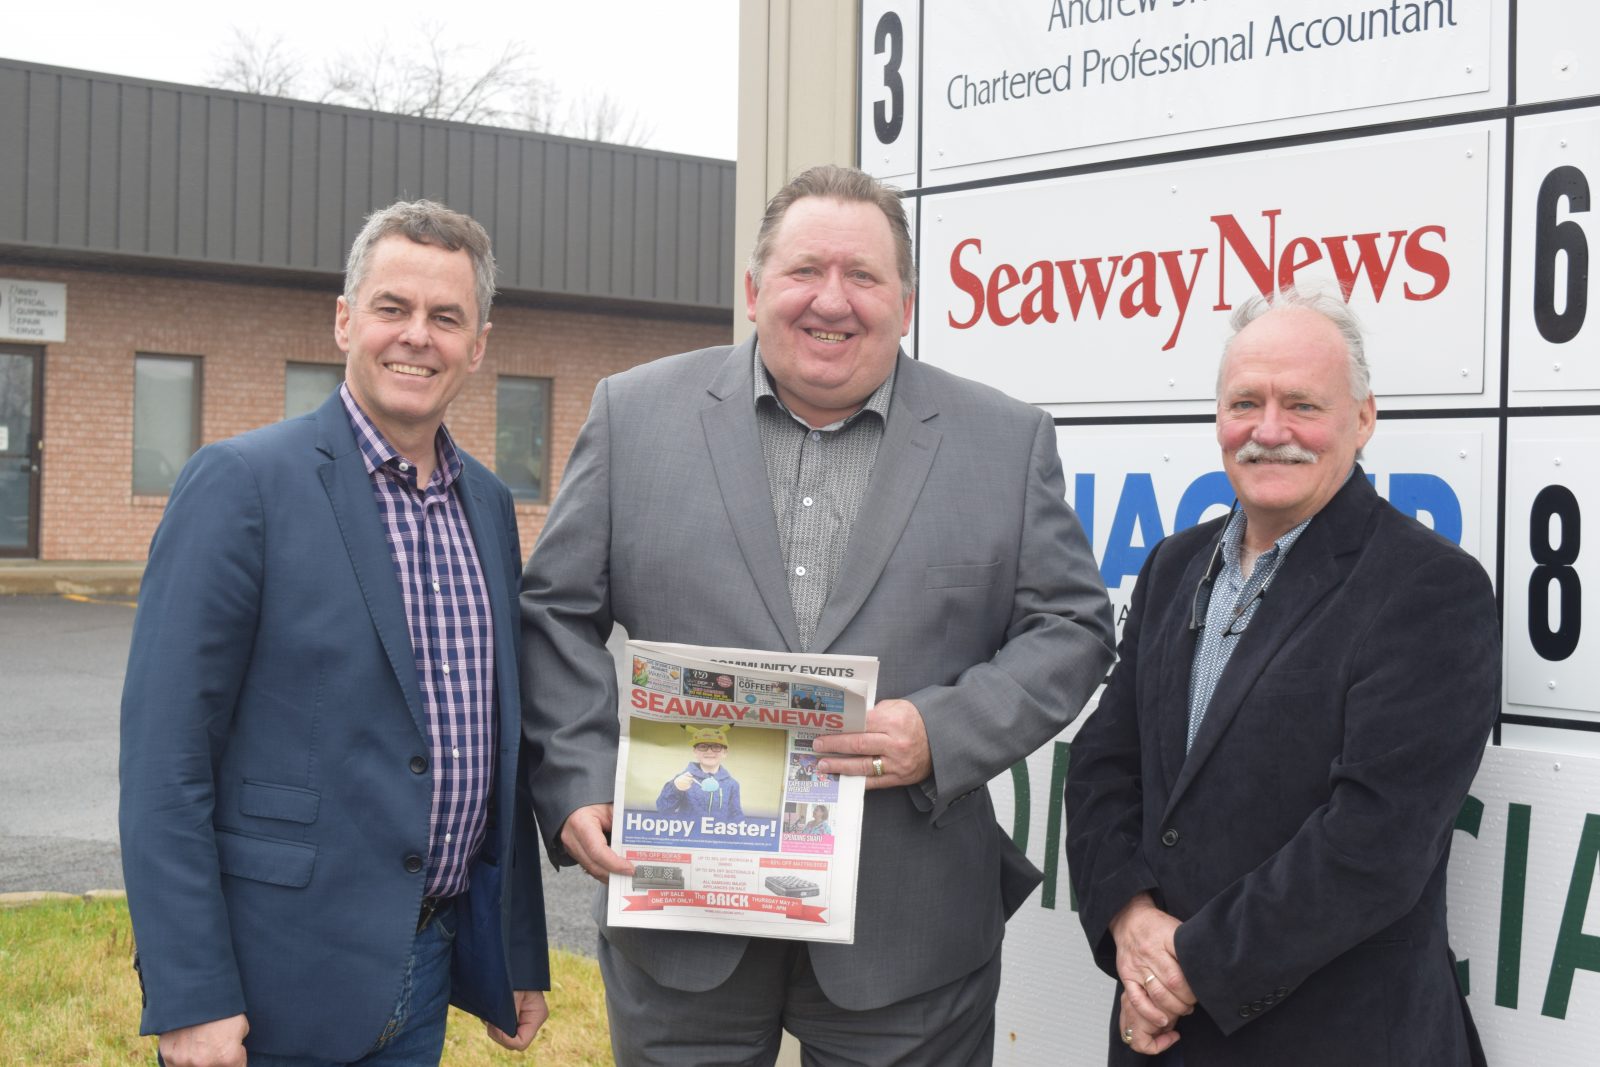 Seaway News purchased by icimédias